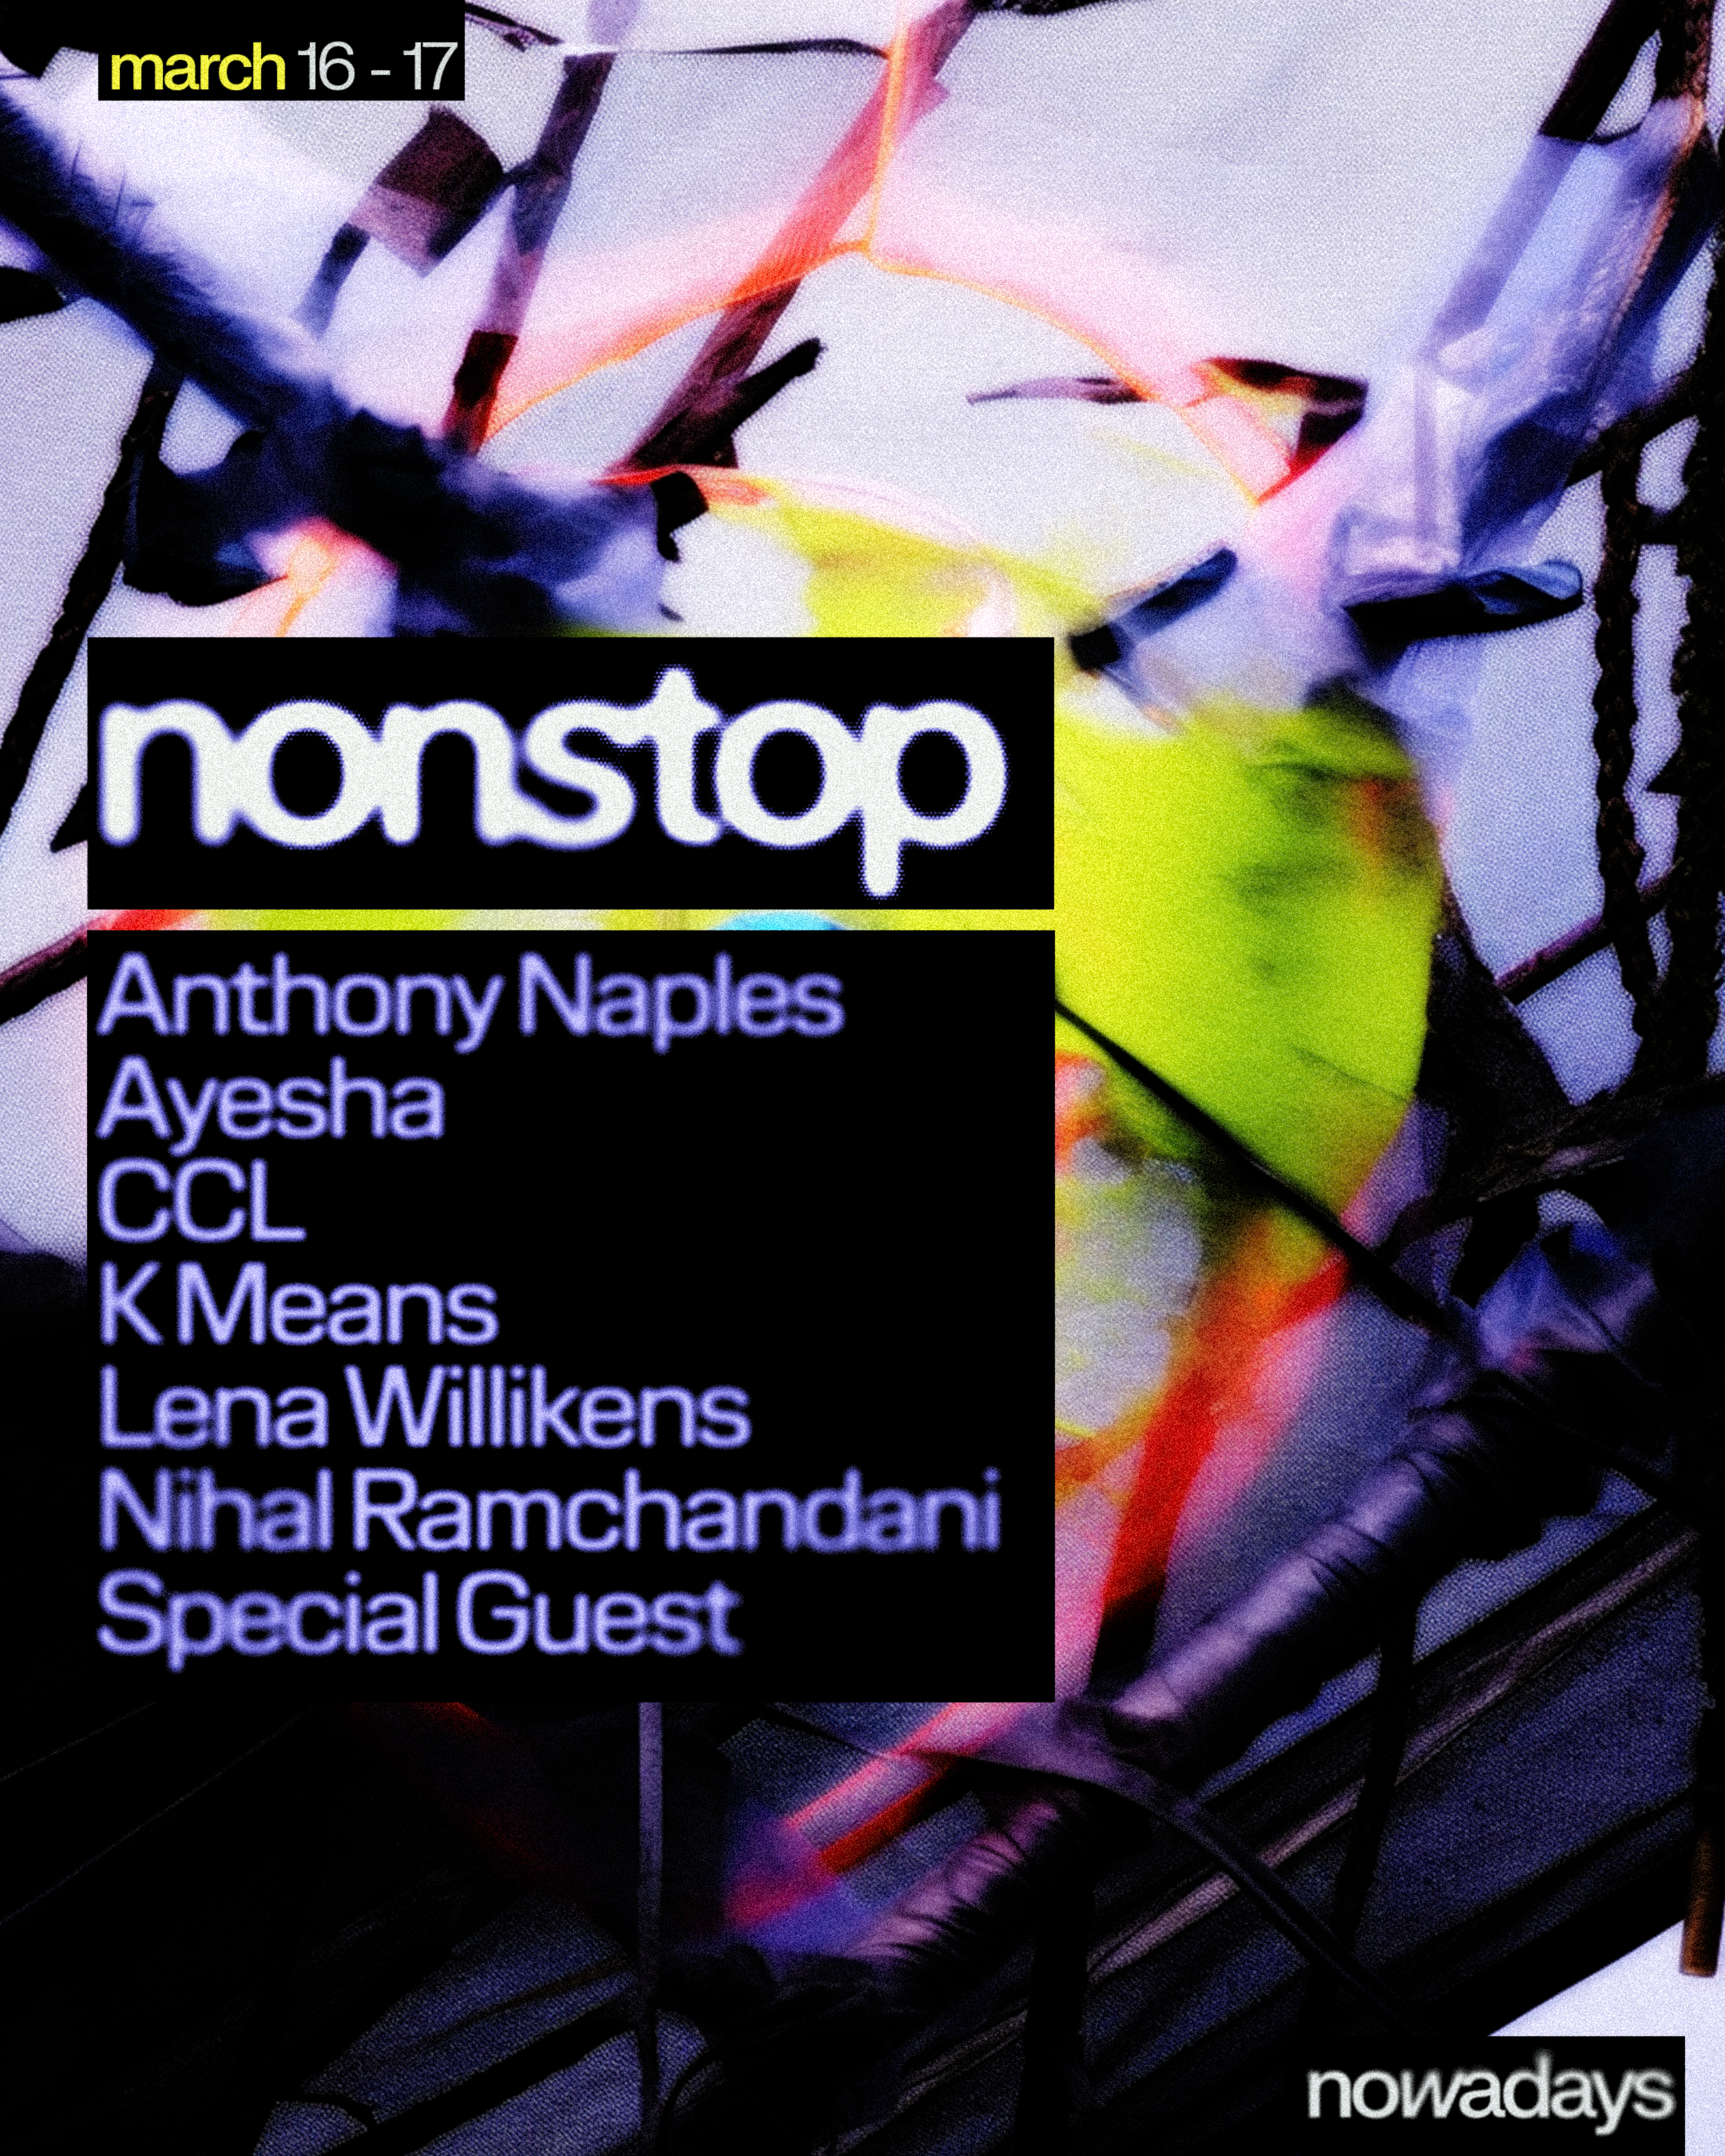 Nonstop: Anthony Naples, Ayesha, CCL, k means, Lena Willikens, Nihal Ramchandani, Special Guest - Página frontal